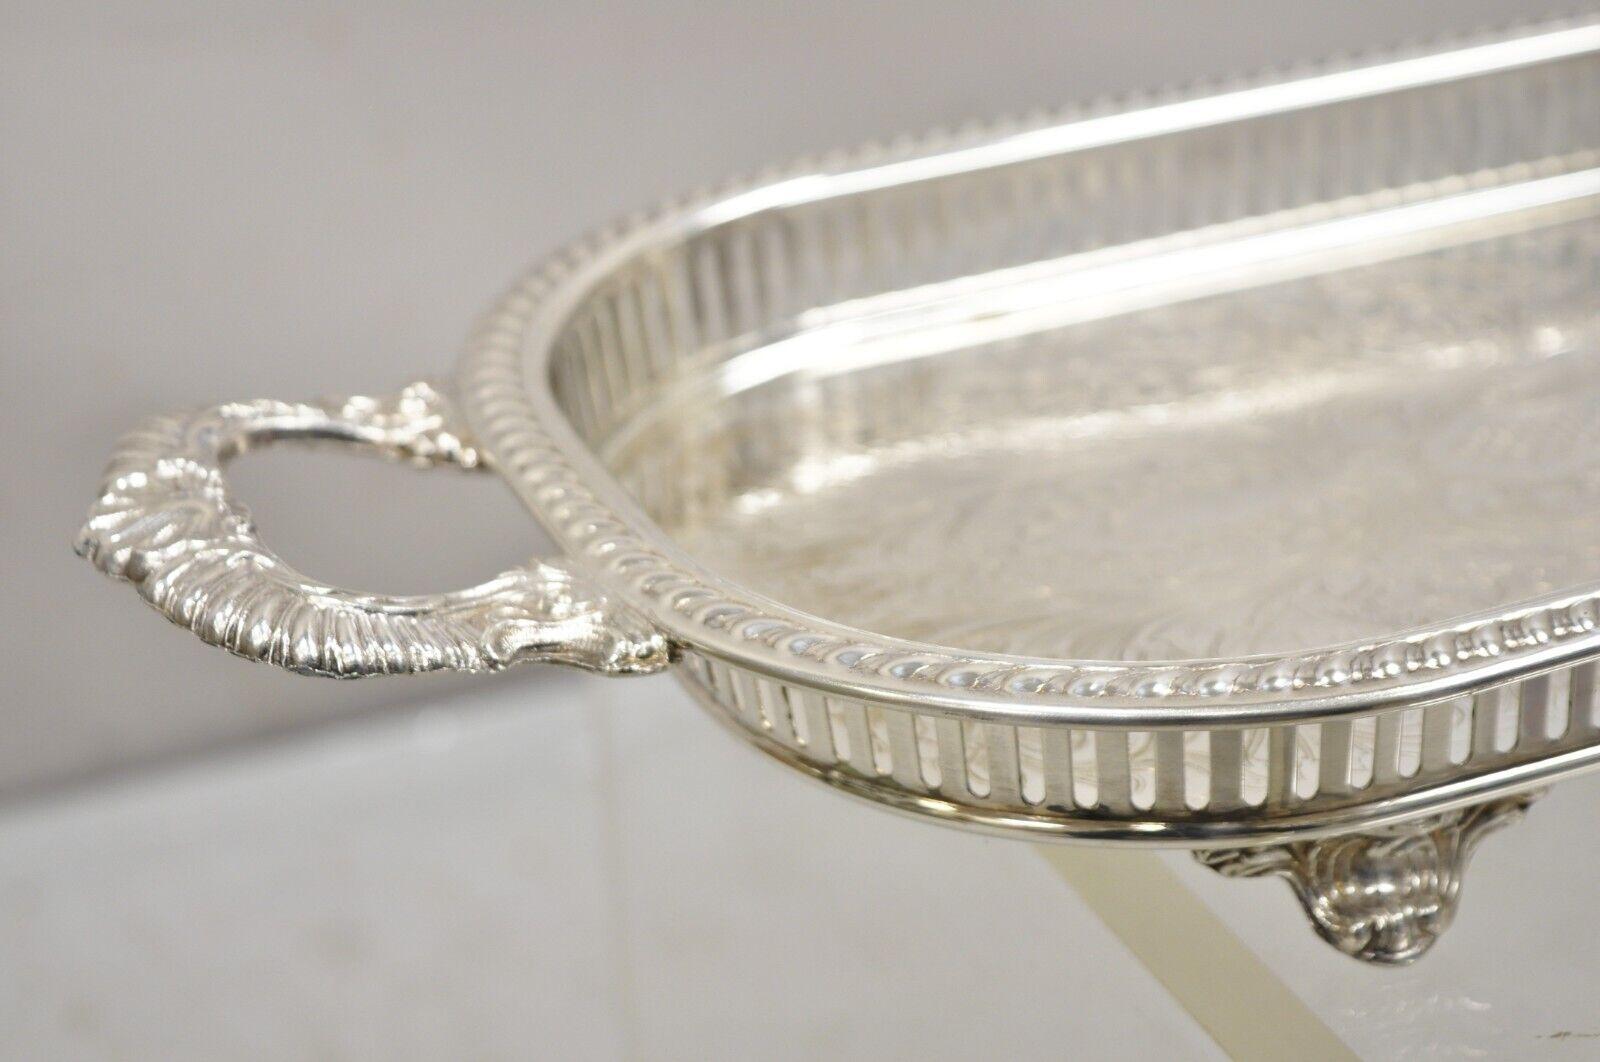 Vtg Victorian Style Silver Plated Narrow Oval Serving Platter Tray by Regency For Sale 7